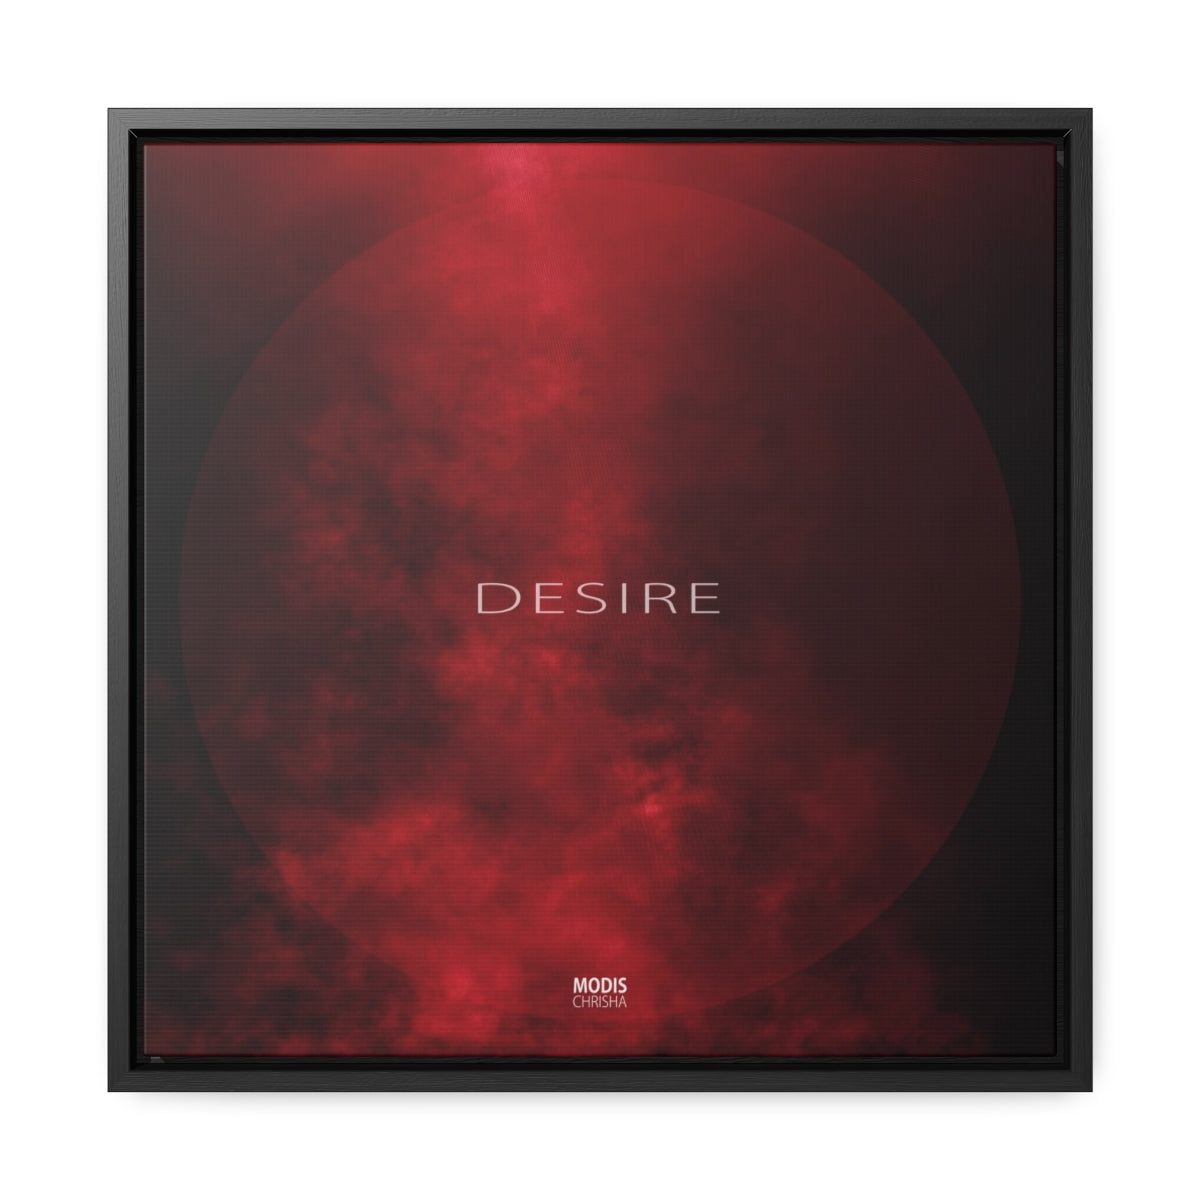 Desire - Square Framed Gallery Wrap Canvas, 16" x 16"